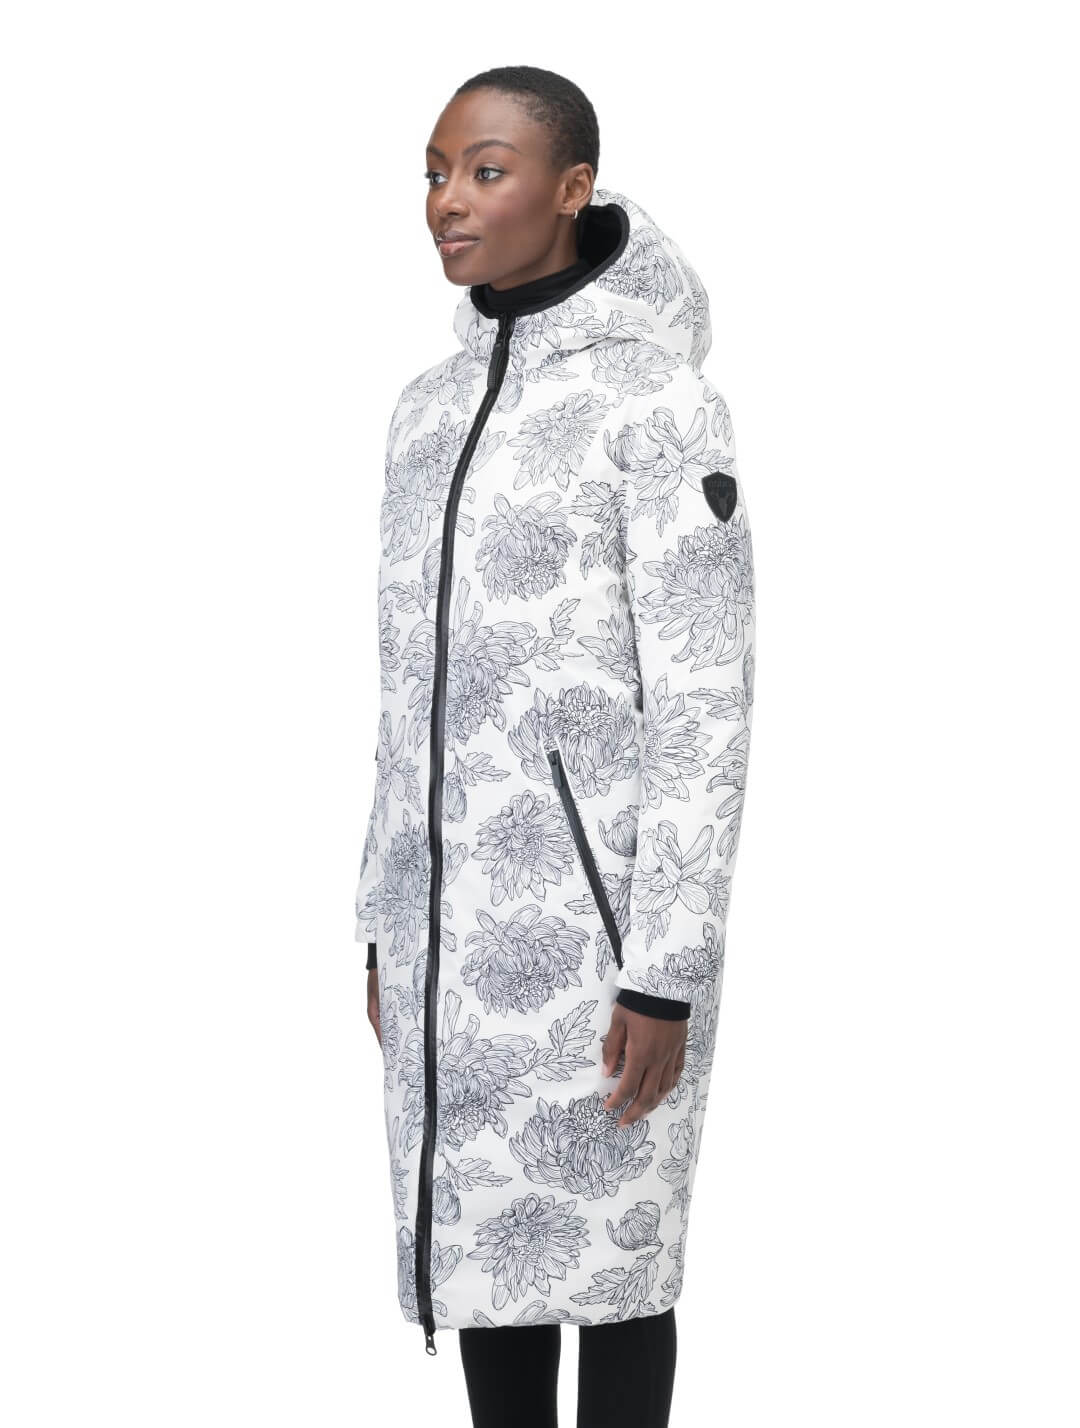 Ladies knee length reversible down-filled parka with non-removable hood in White Floral